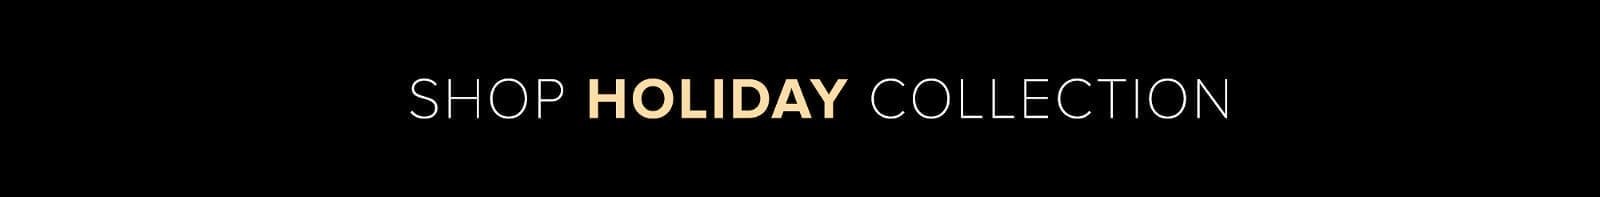 Shop holiday collection